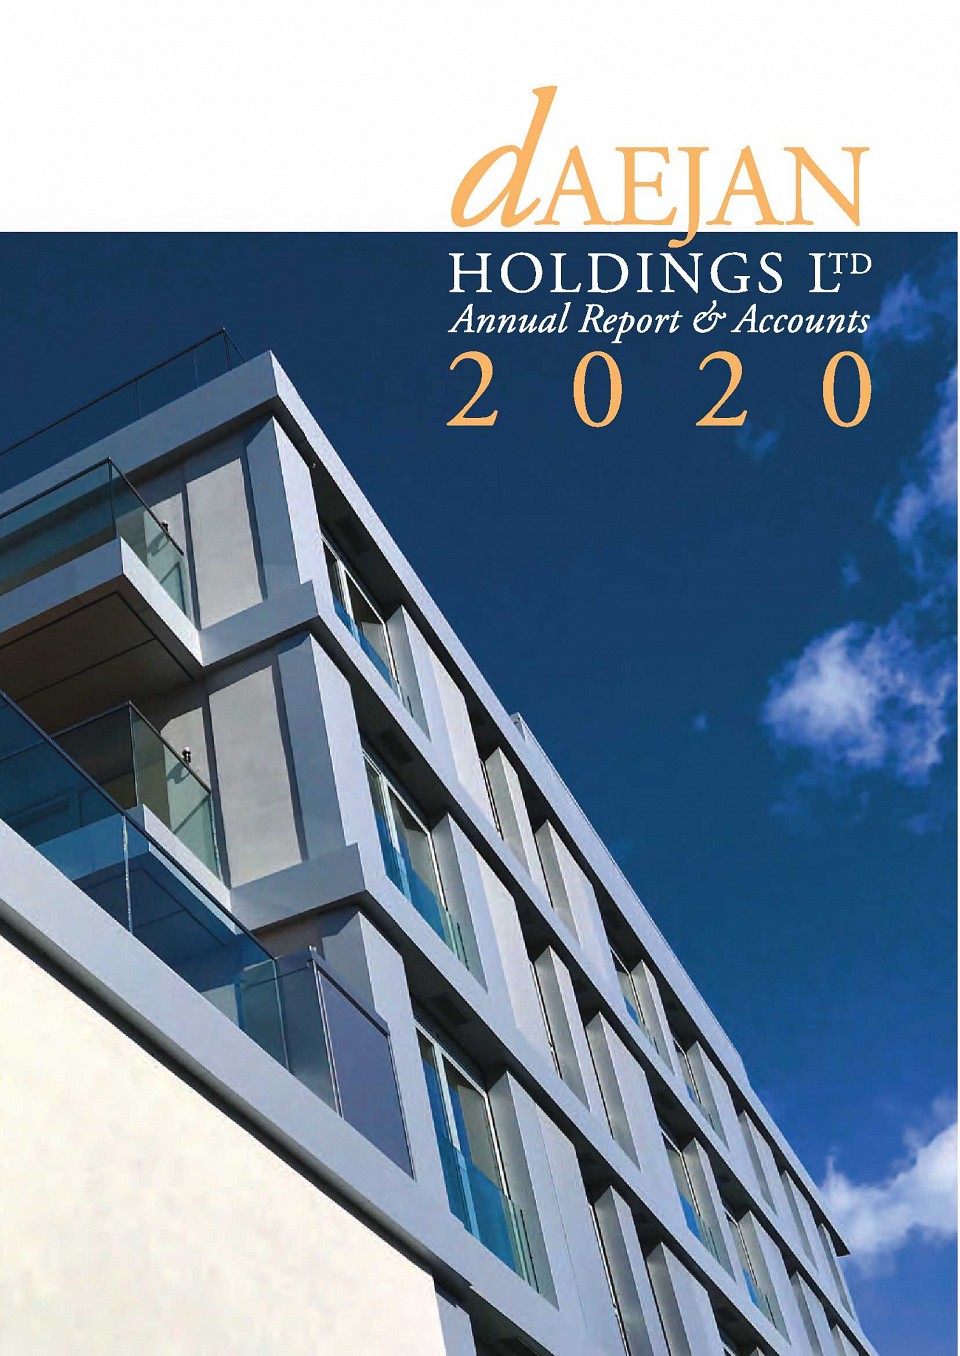 View our Annual Report & Accounts 2020